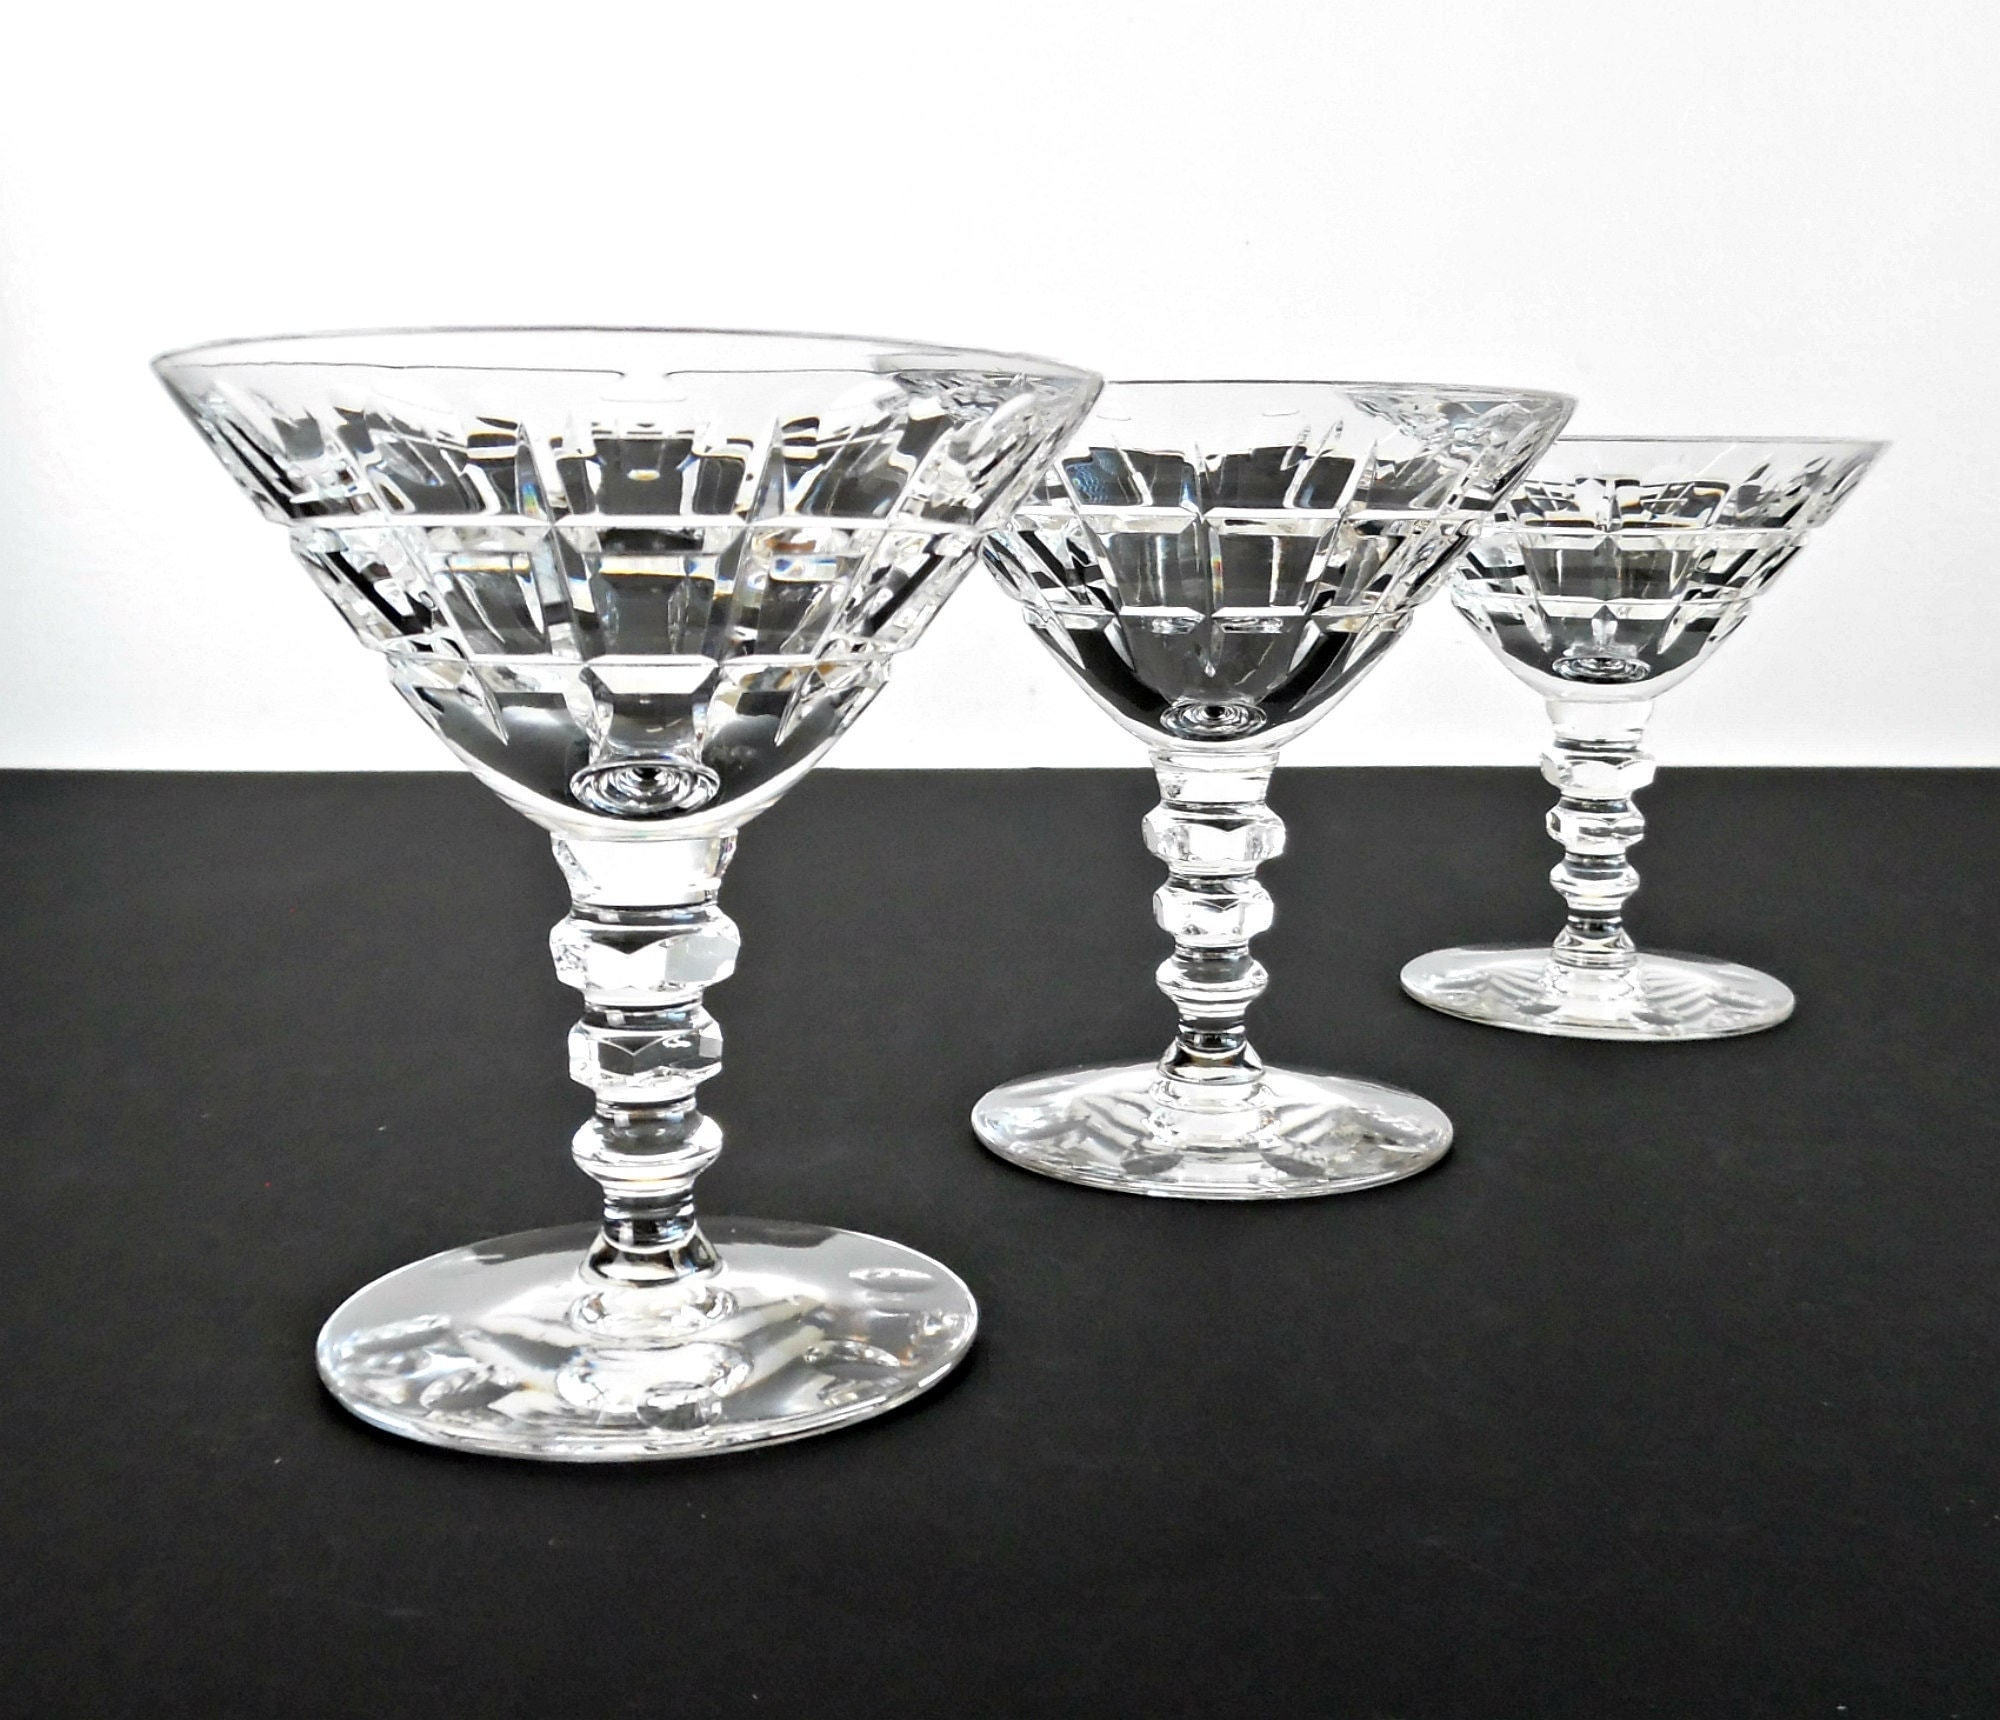 Nude Glass Vintage Rounded Crystal Martini Glasses - 6.42 oz - Set of 2